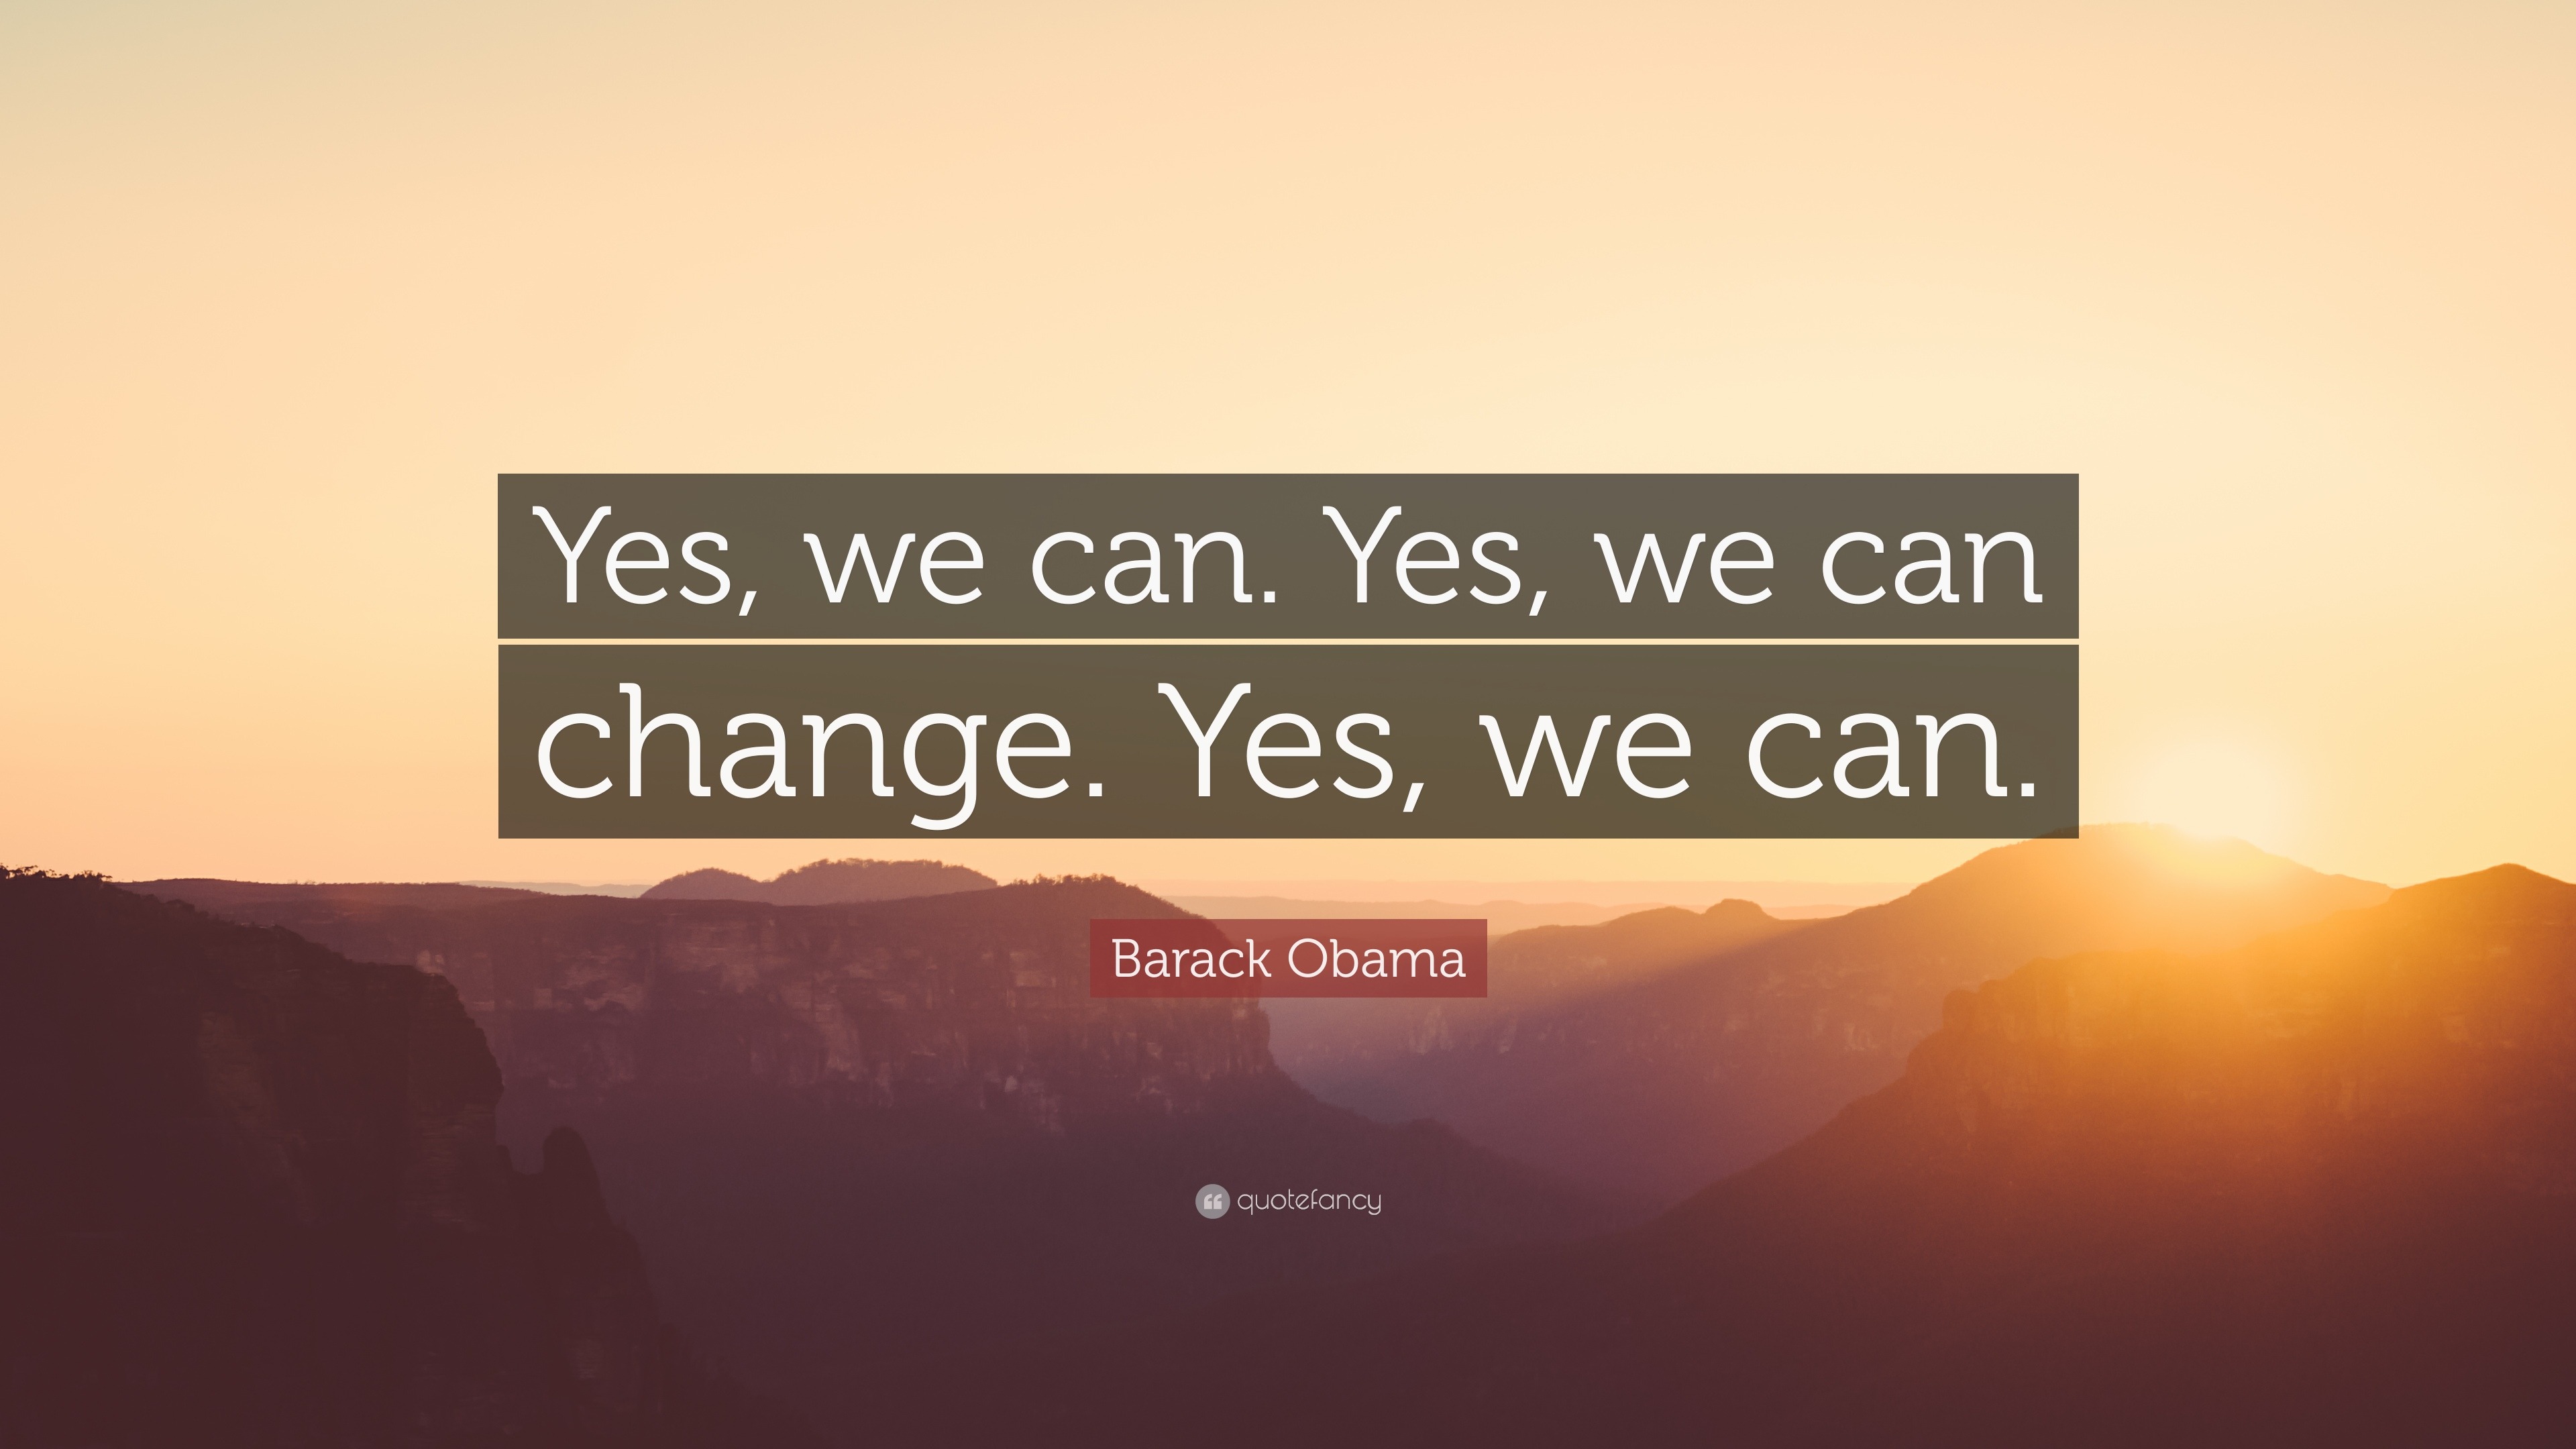 Barack Obama Quote: “Yes, we can. Yes, we can change. Yes, we can.”